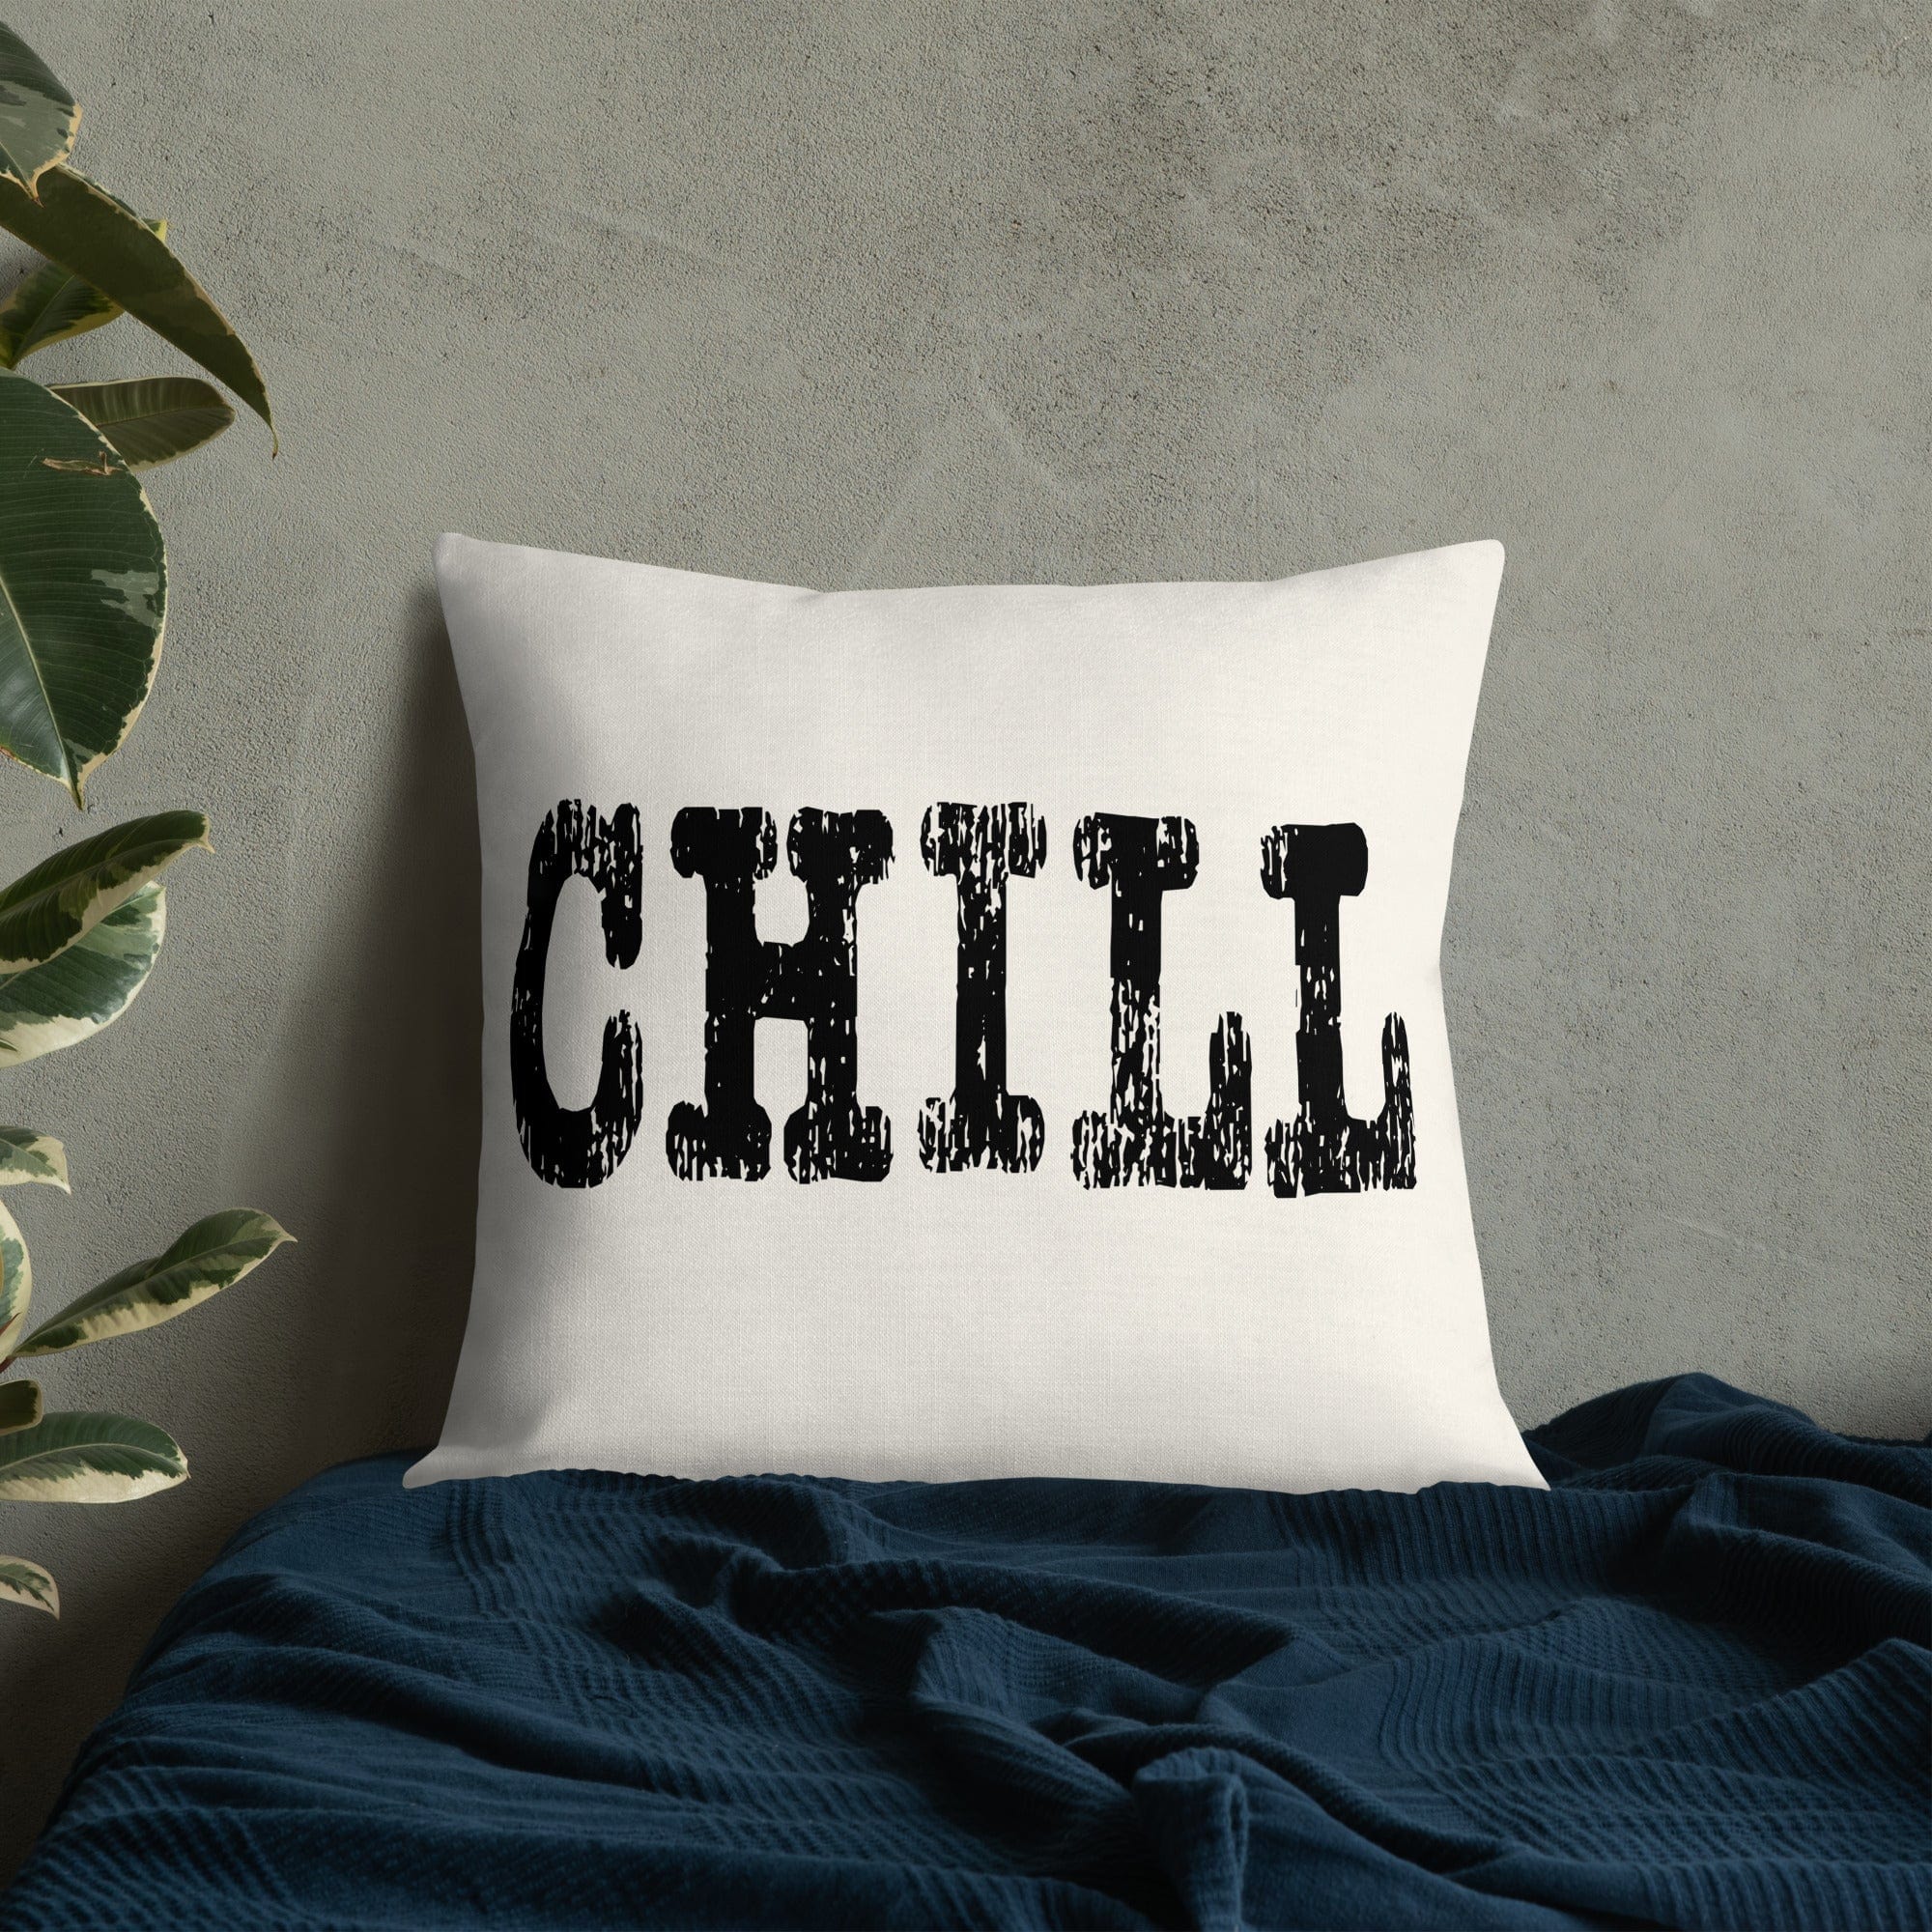 CHILL Inspirational Quote Decorative Throw Pillow Accent Cushion Throw Pillows A Moment Of Now Women’s Boutique Clothing Online Lifestyle Store